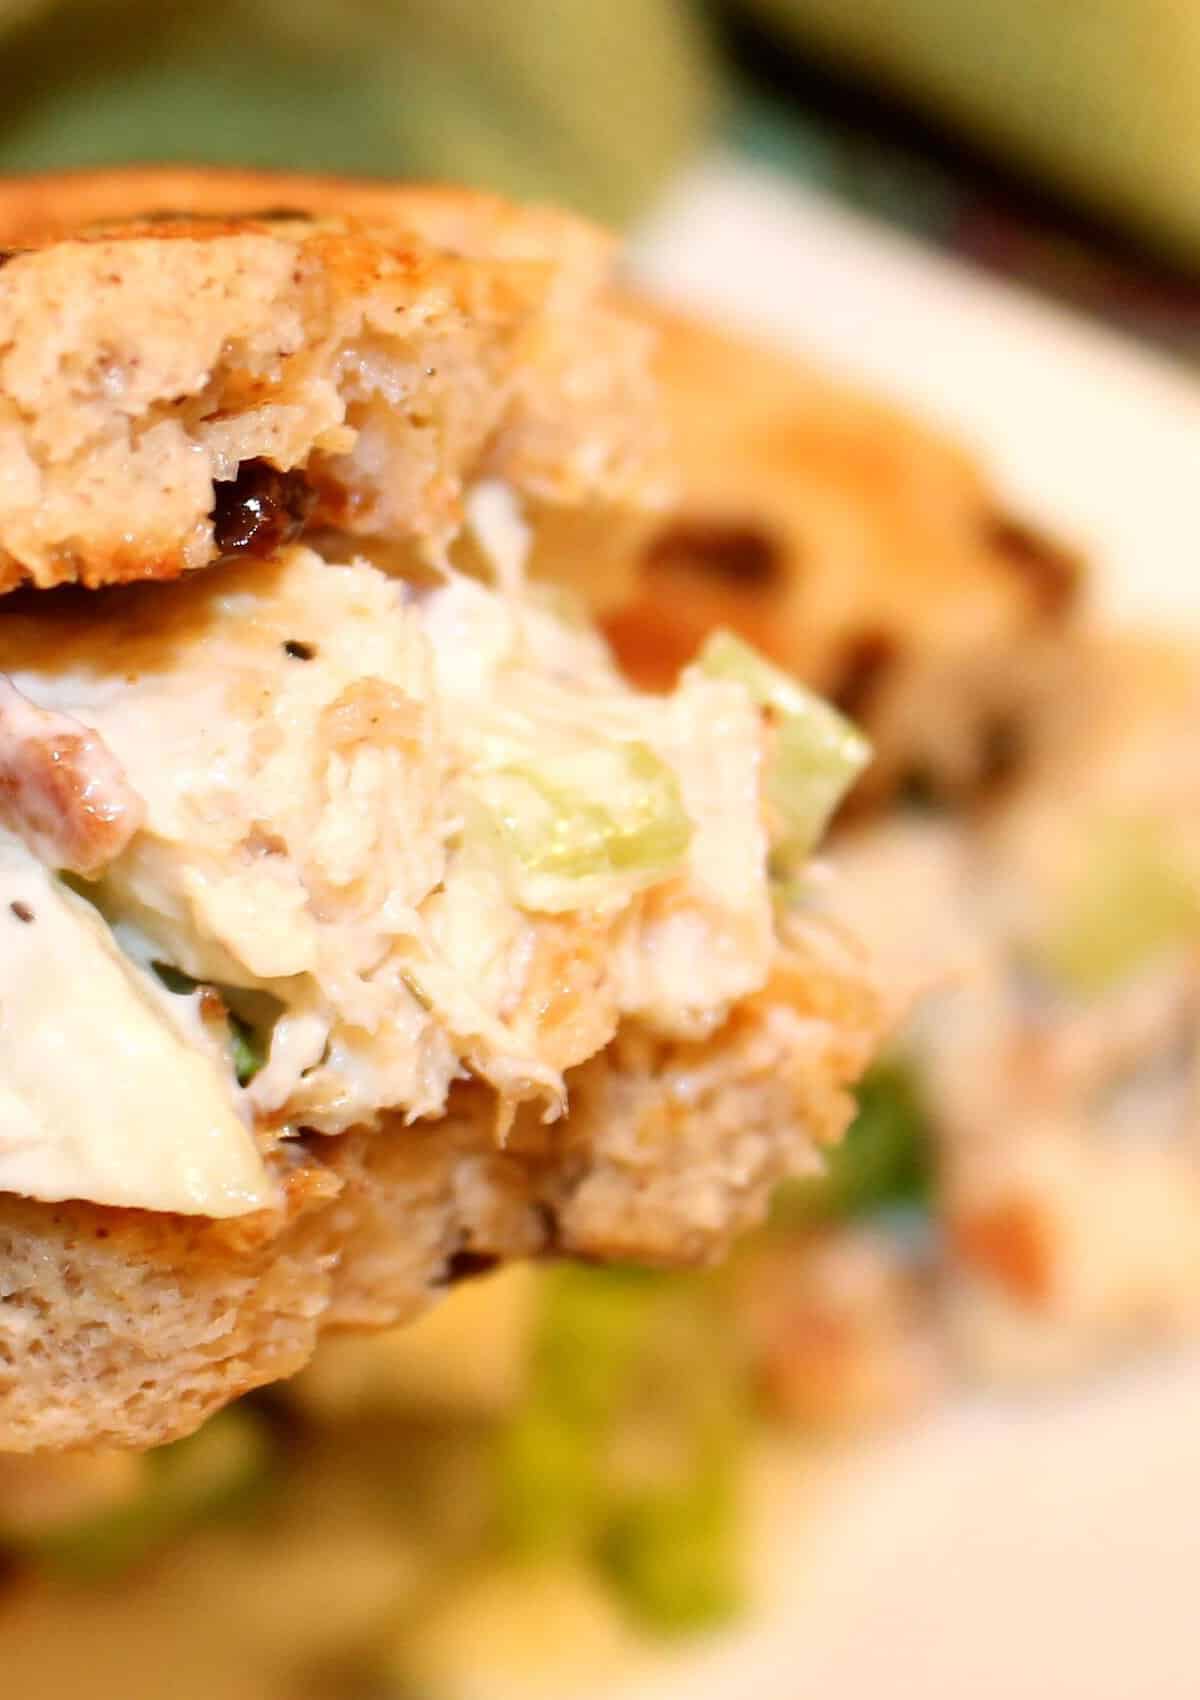  It's time to renovate your lunch game and add some sweet to savory with our waldorf chicken salad.